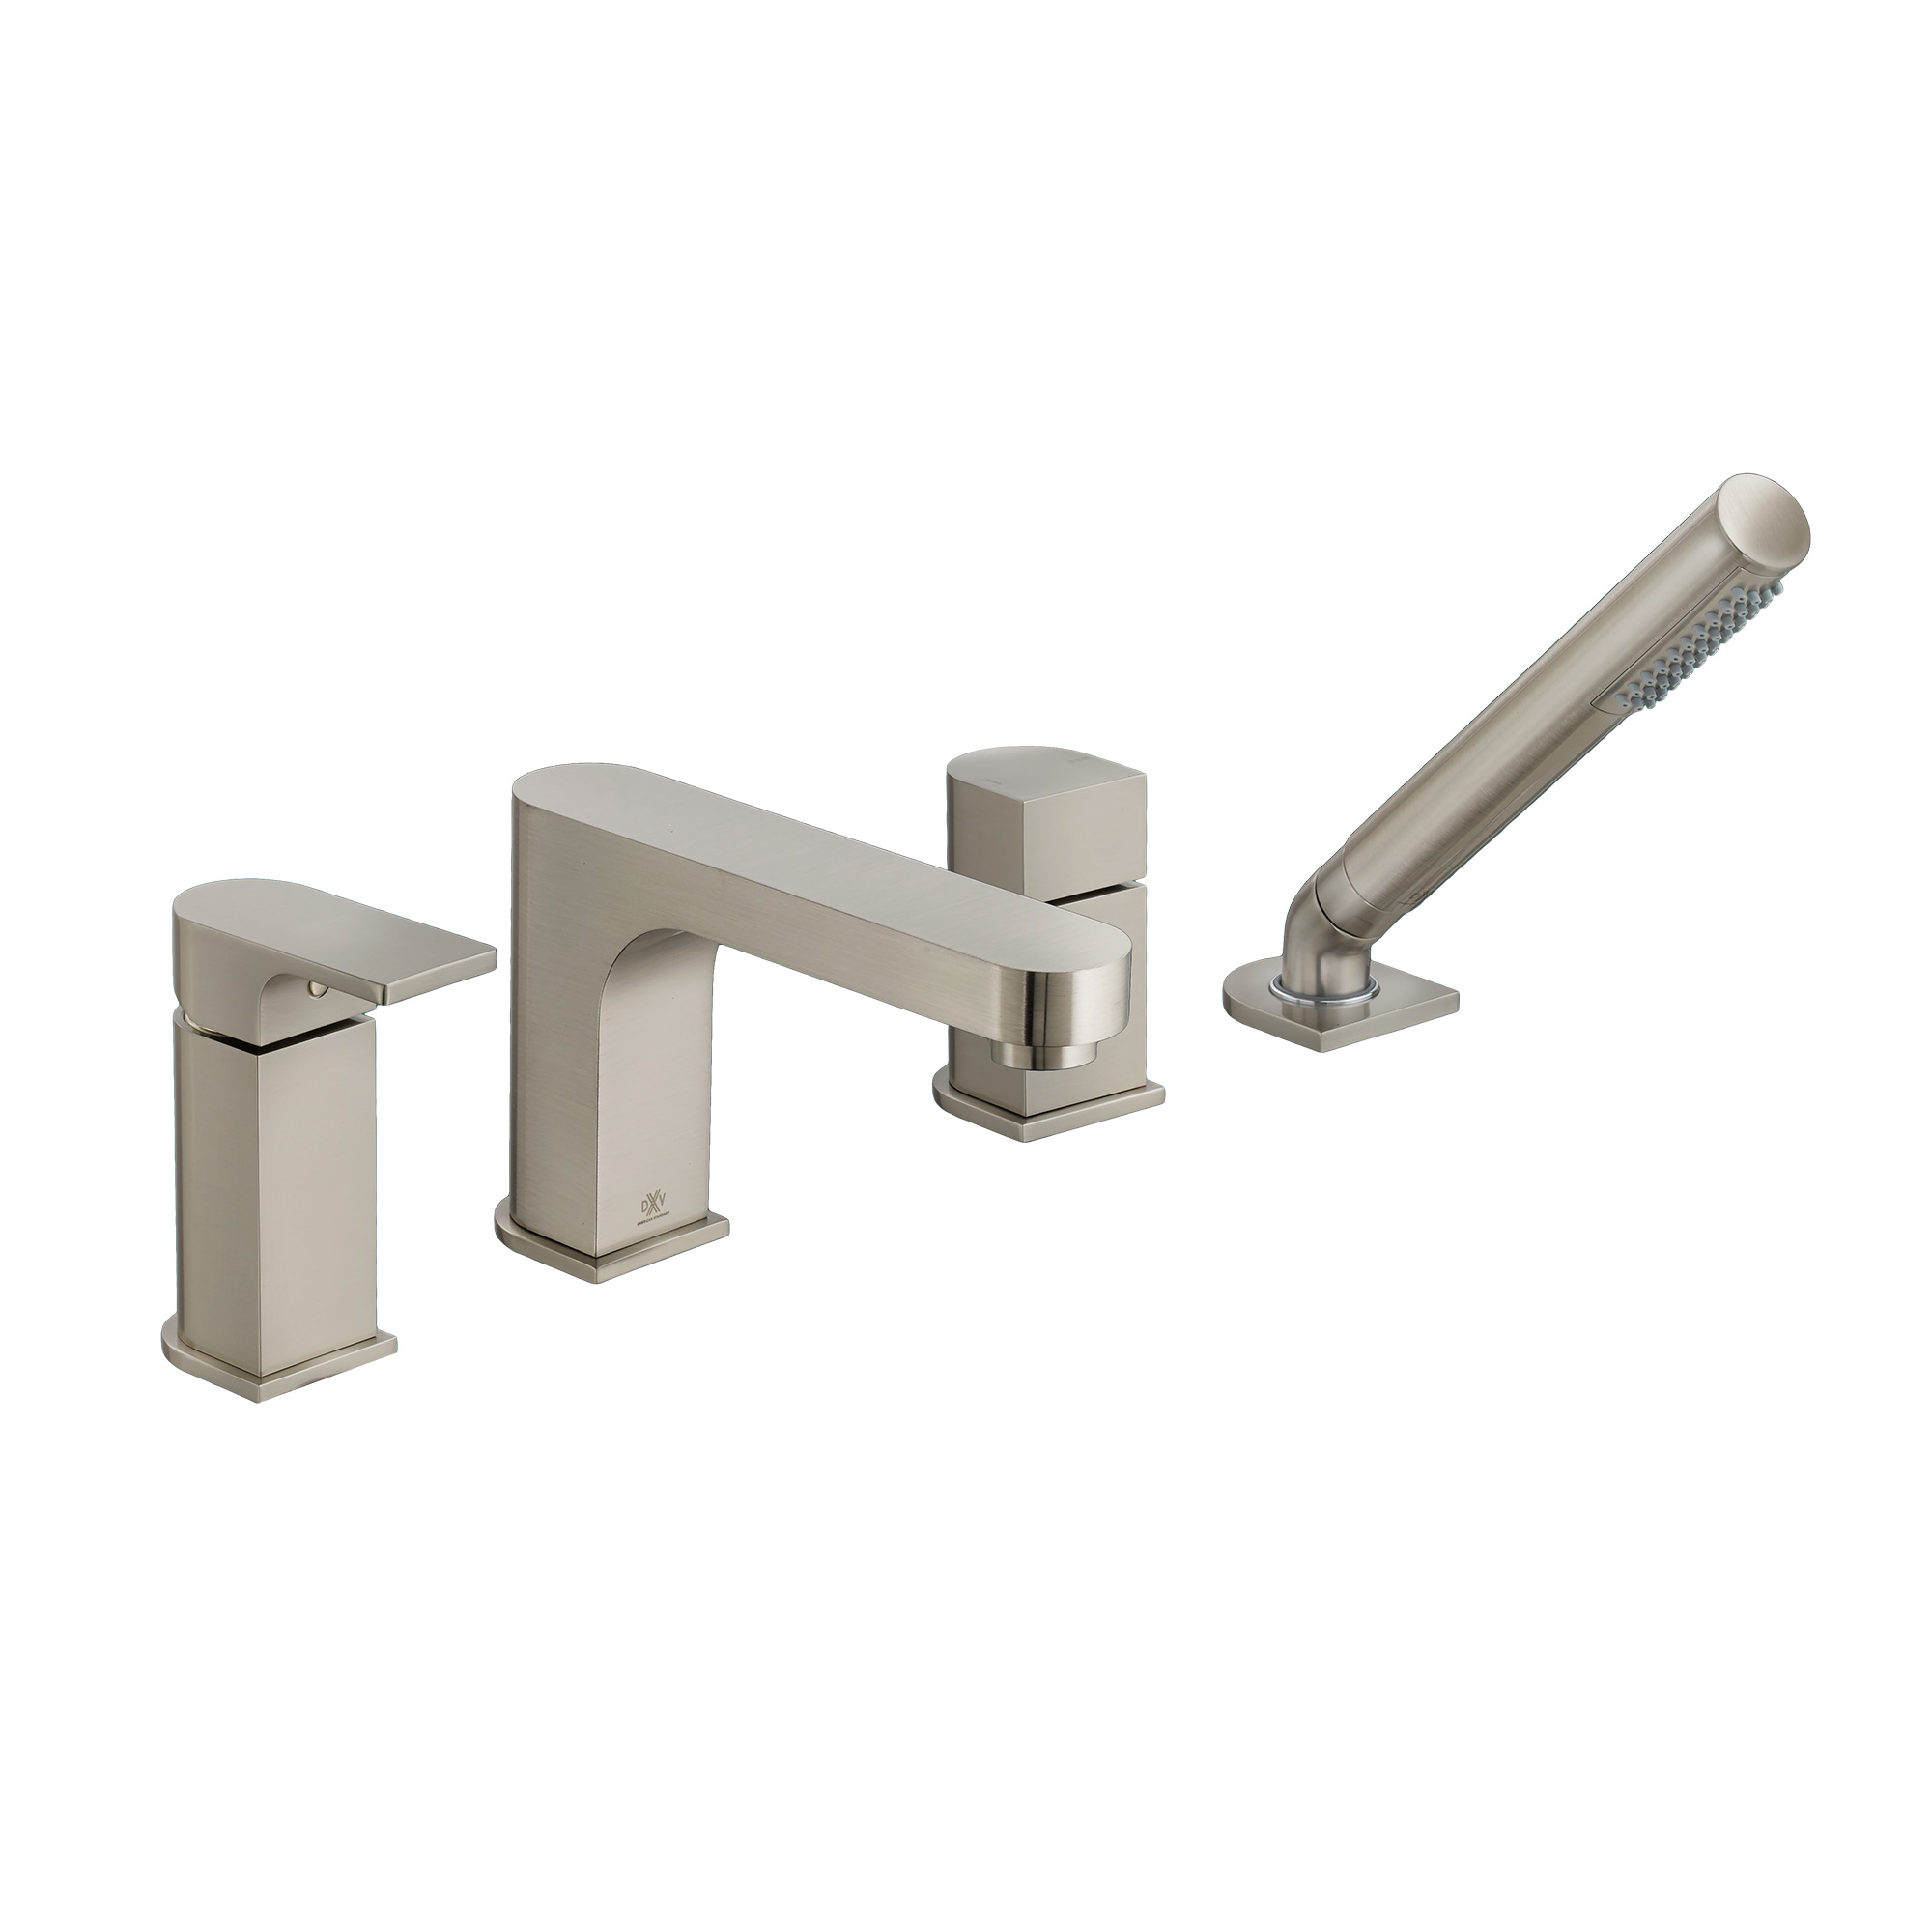 Equility Single Handle Deck Mount Bathtub Faucet with Hand Shower and Lever Handle